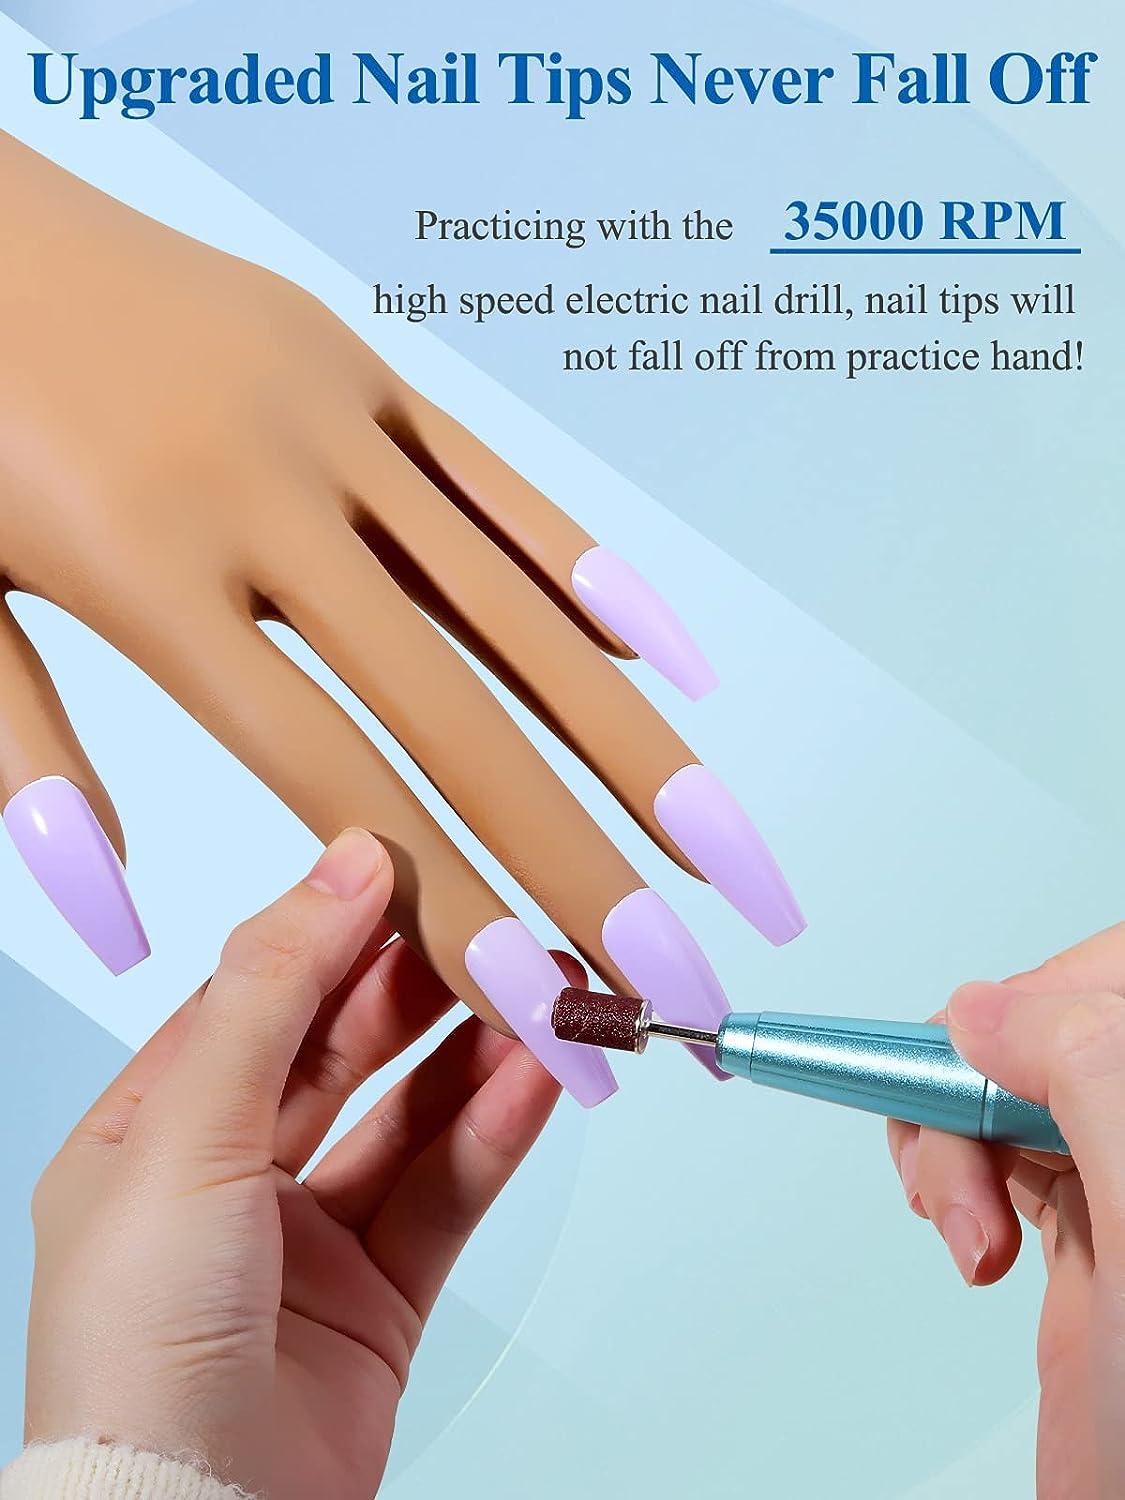 Practice Hand For Acrylic Nails - BTArtbox Upgraded Nail Tips Never Fall  Off Fingers Never Break Flexible Movable Nails Training Hand Ideal for  Practicing Nail Supplies LXJS-04 1 Count (Pack of Brown)